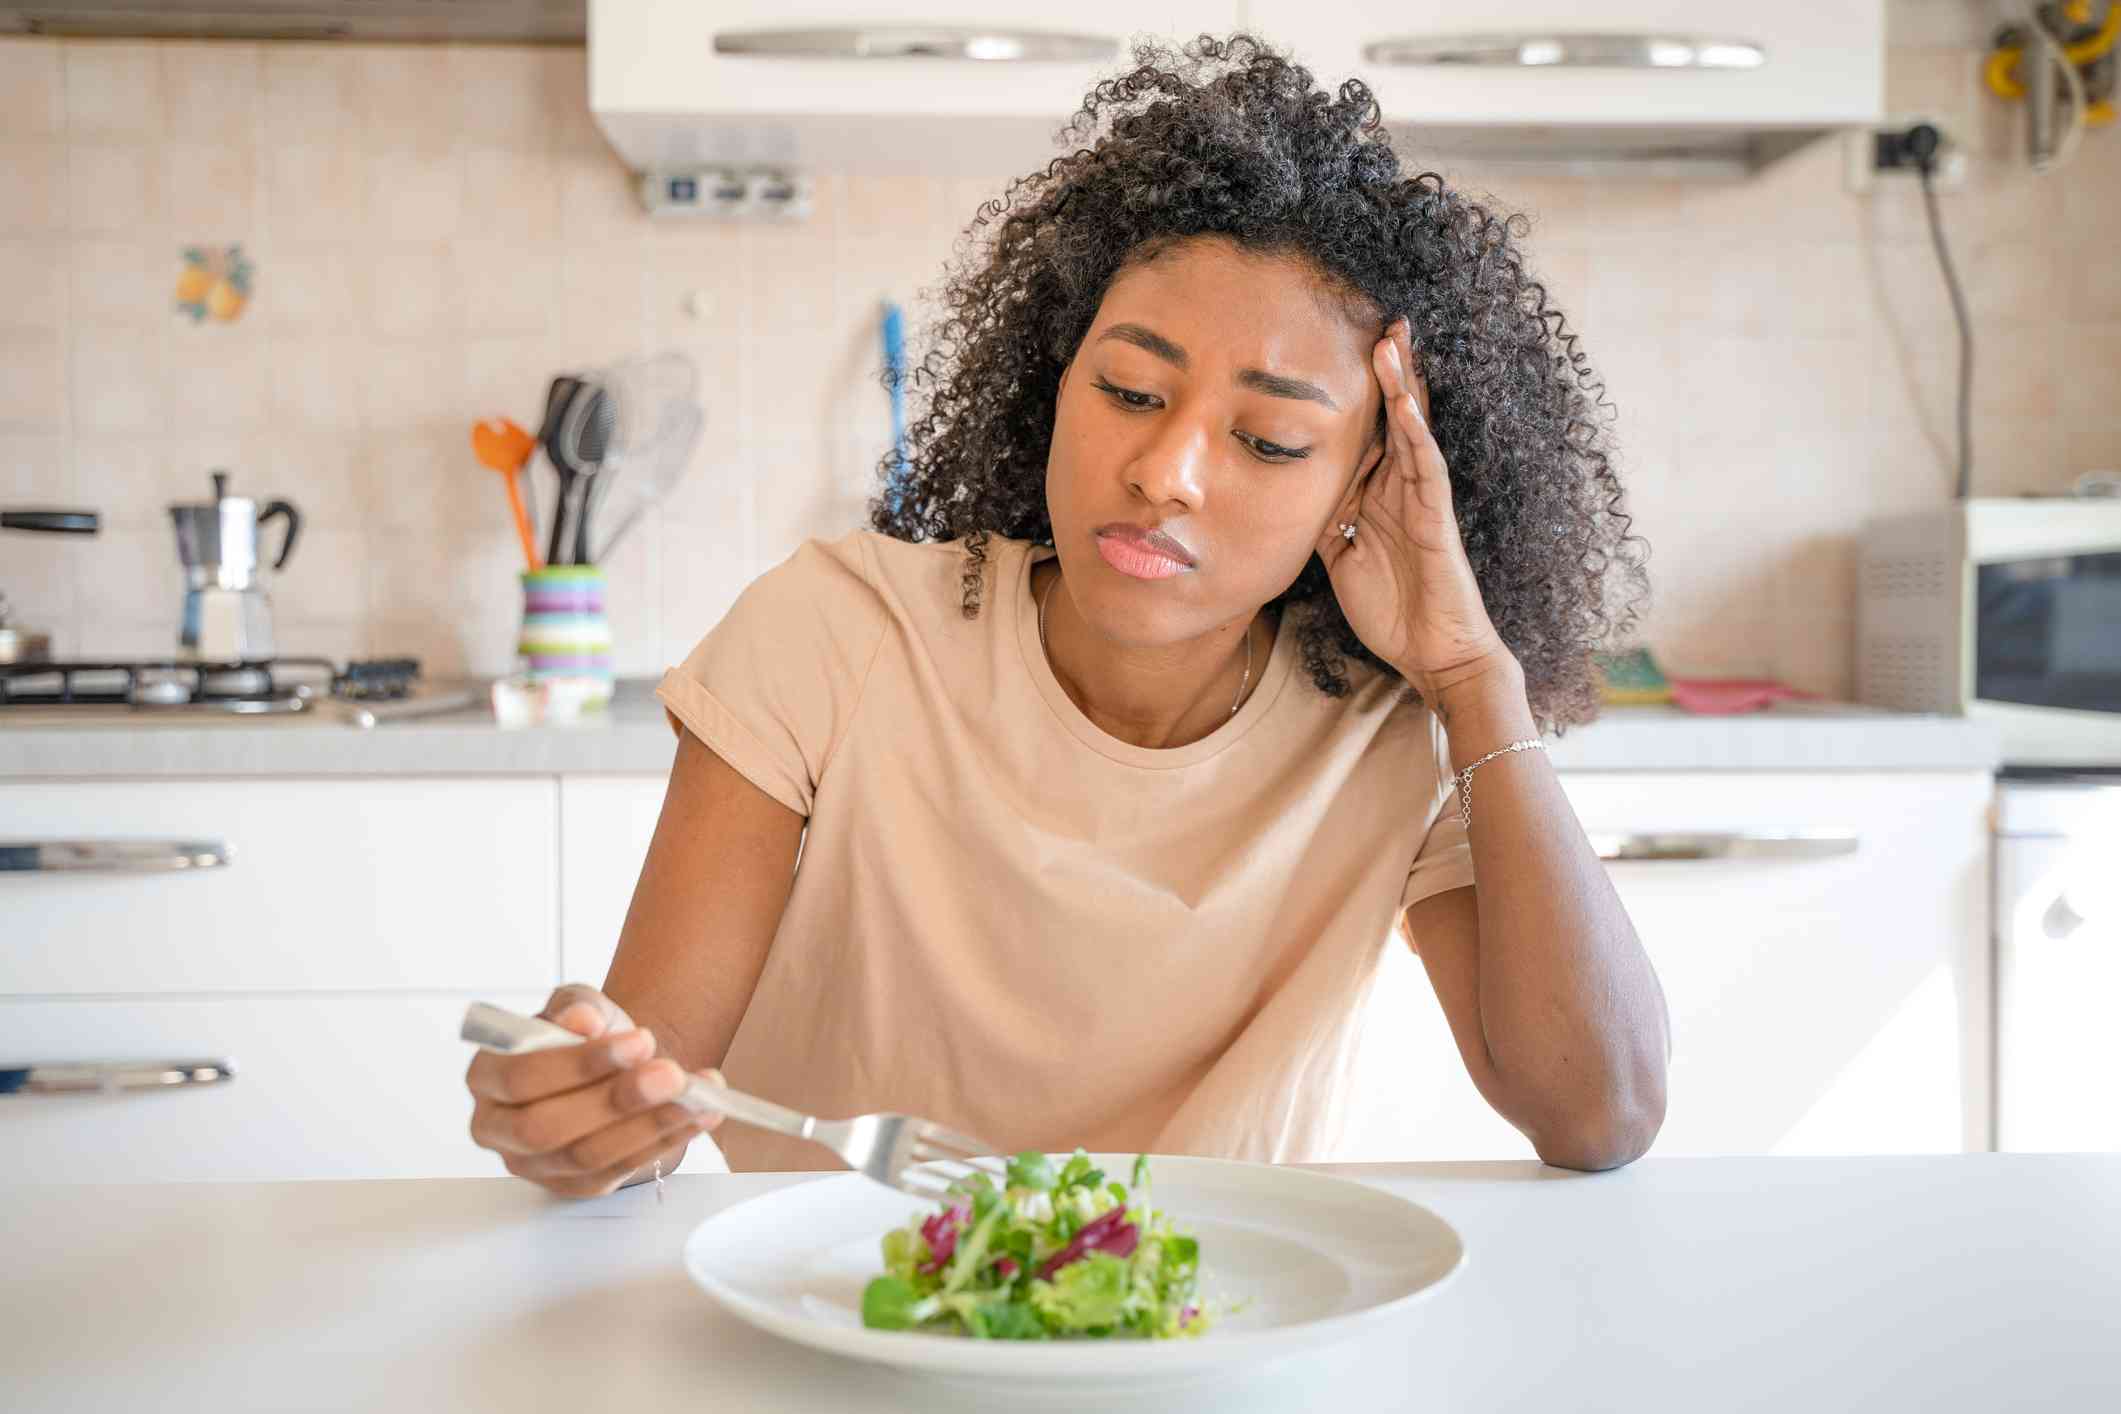 A woman in a tan shirt sits hunched over a salad at the kitchen table with a sad epression as she picks at the food.